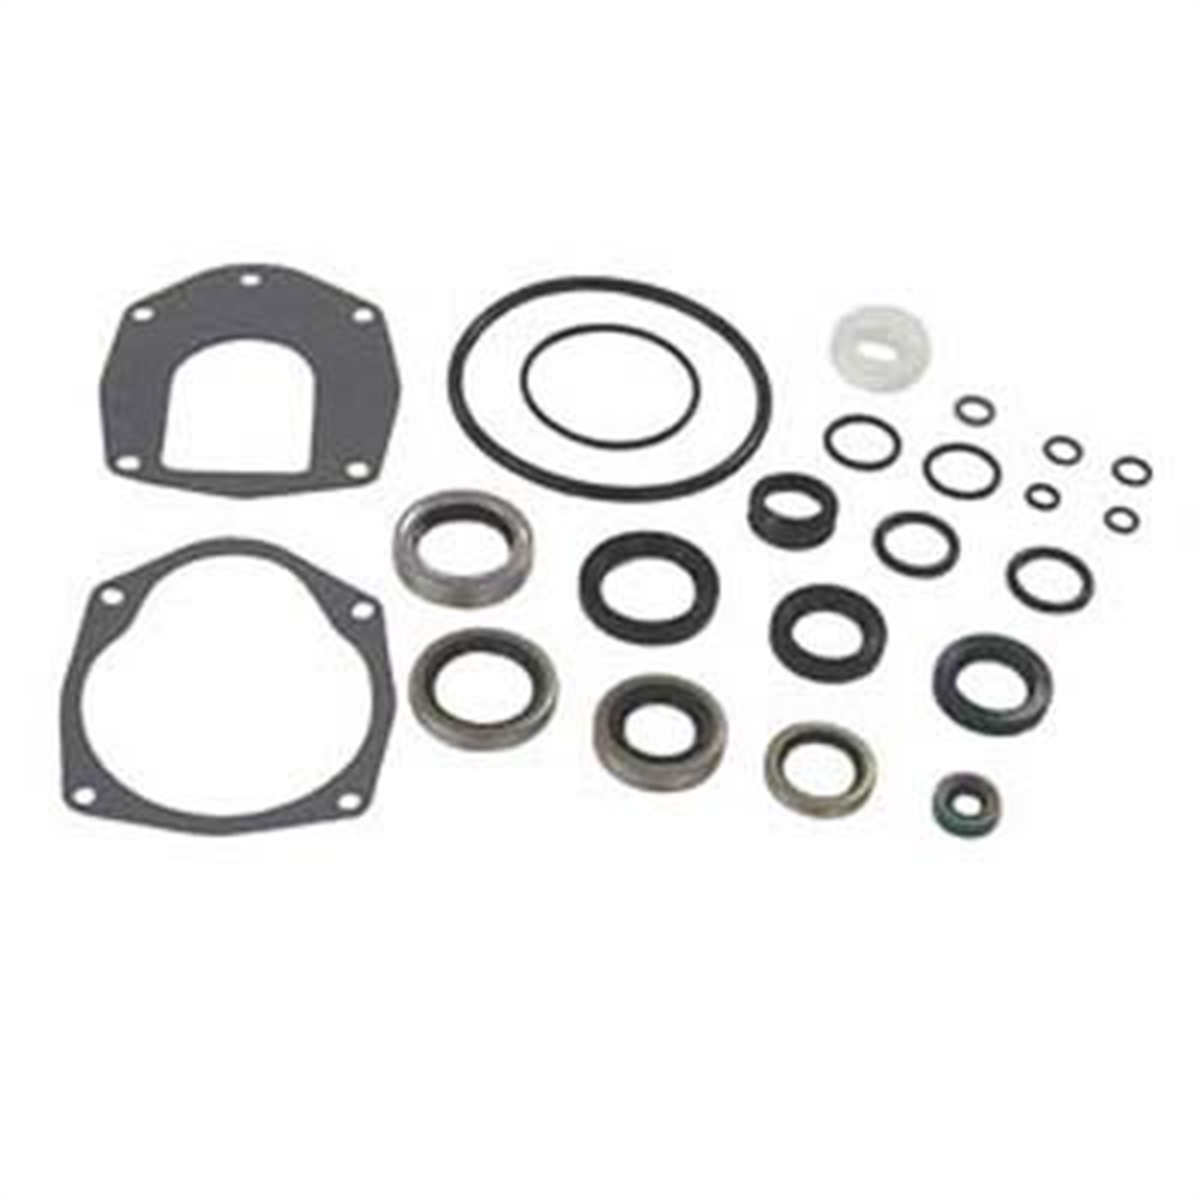 Air Unit Seal Kit for 1788A